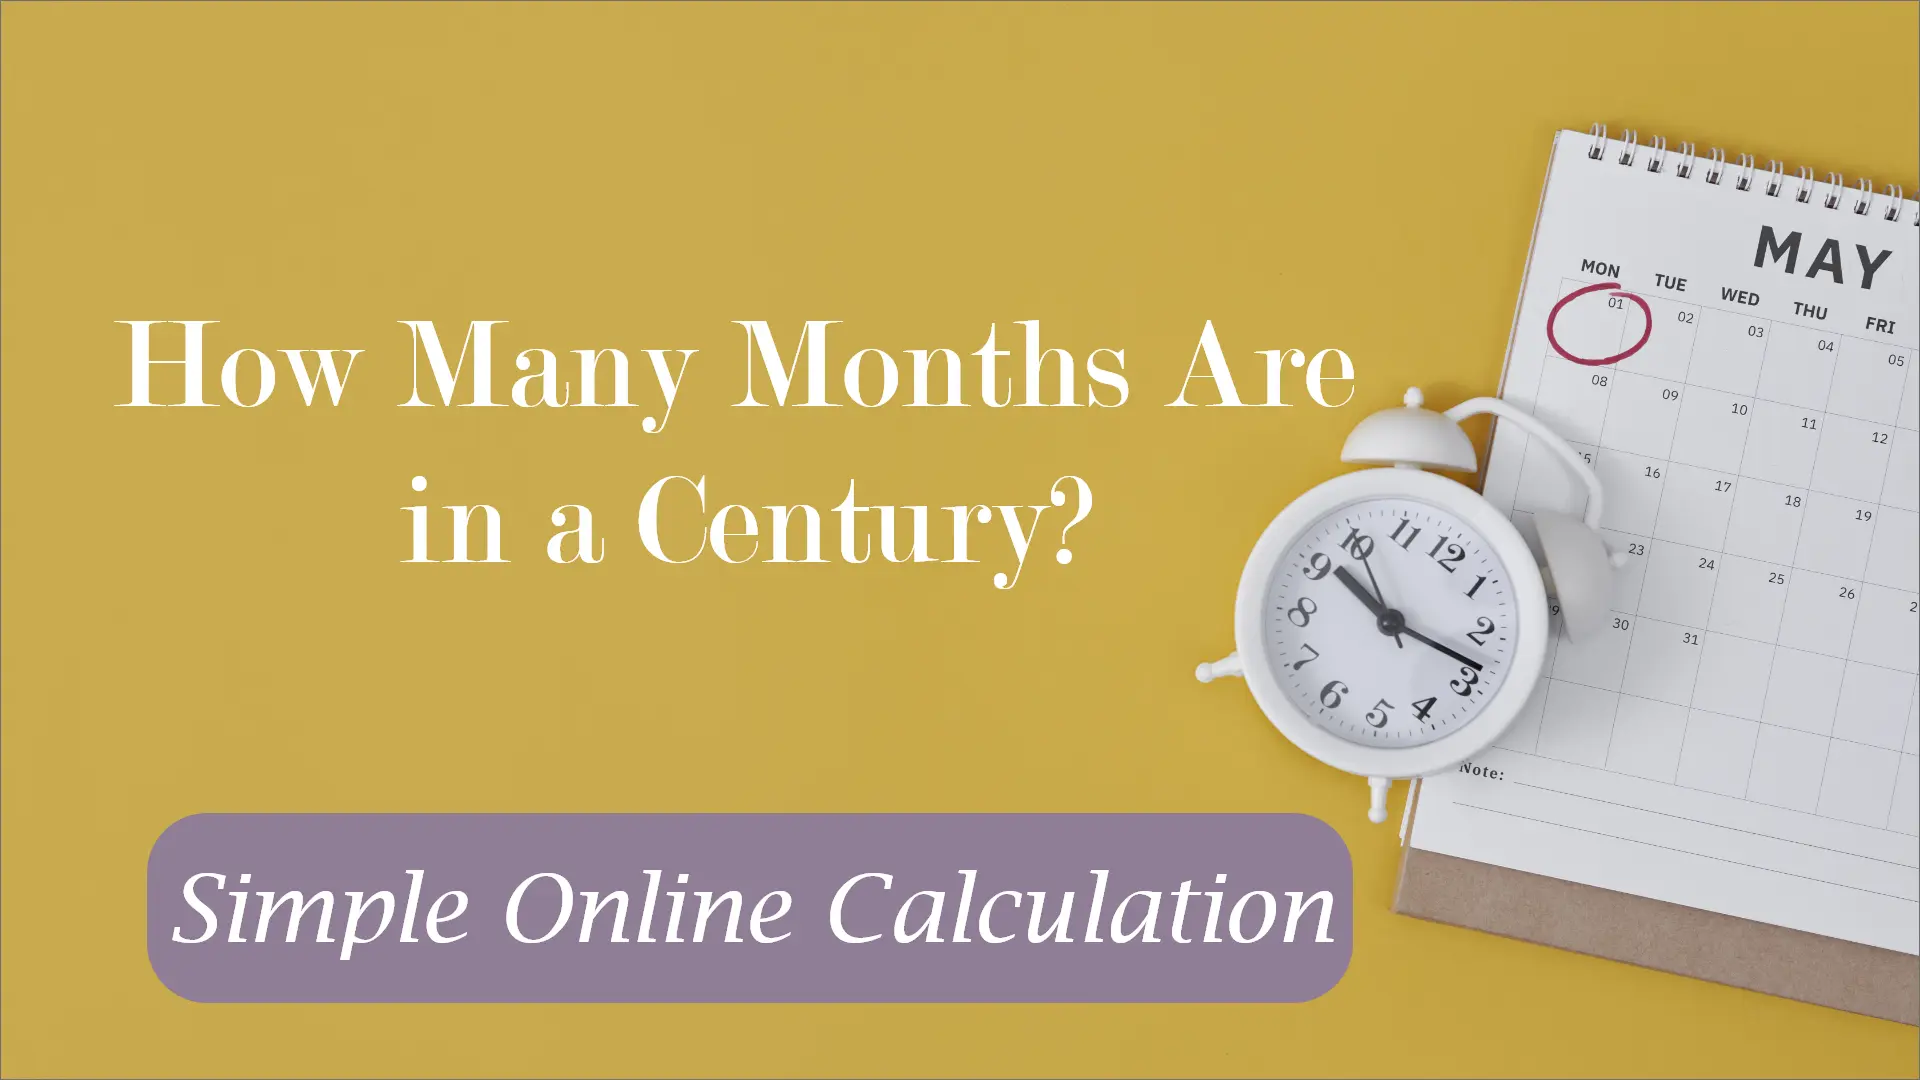 How Many Months in a Century?